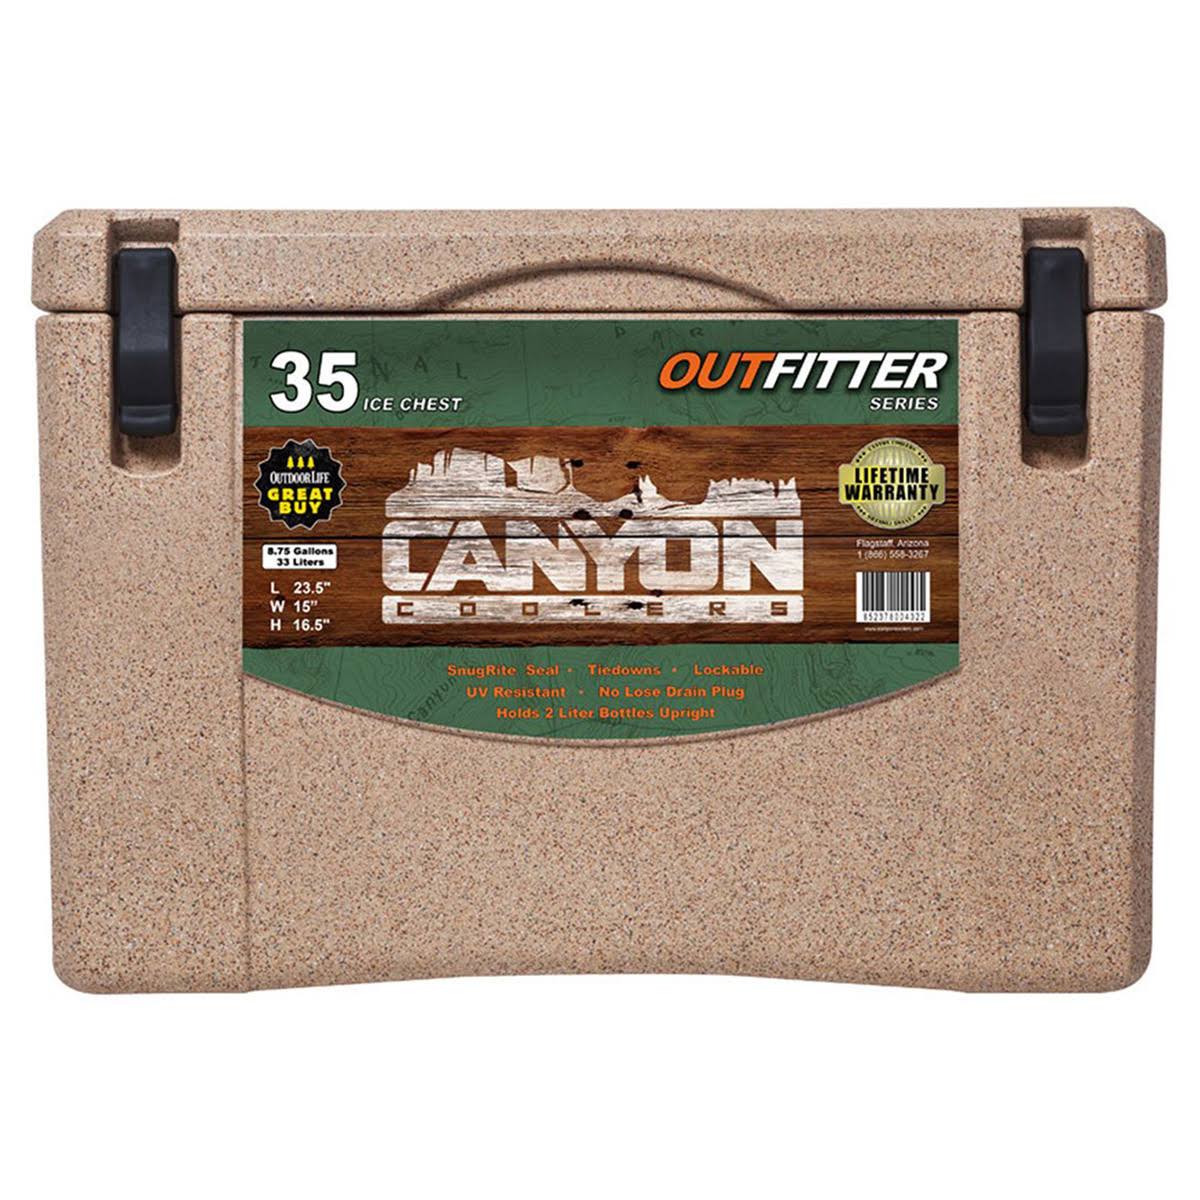 Canyon Coolers Series 35 Outfitter Cooler - Sandstone, 35qt